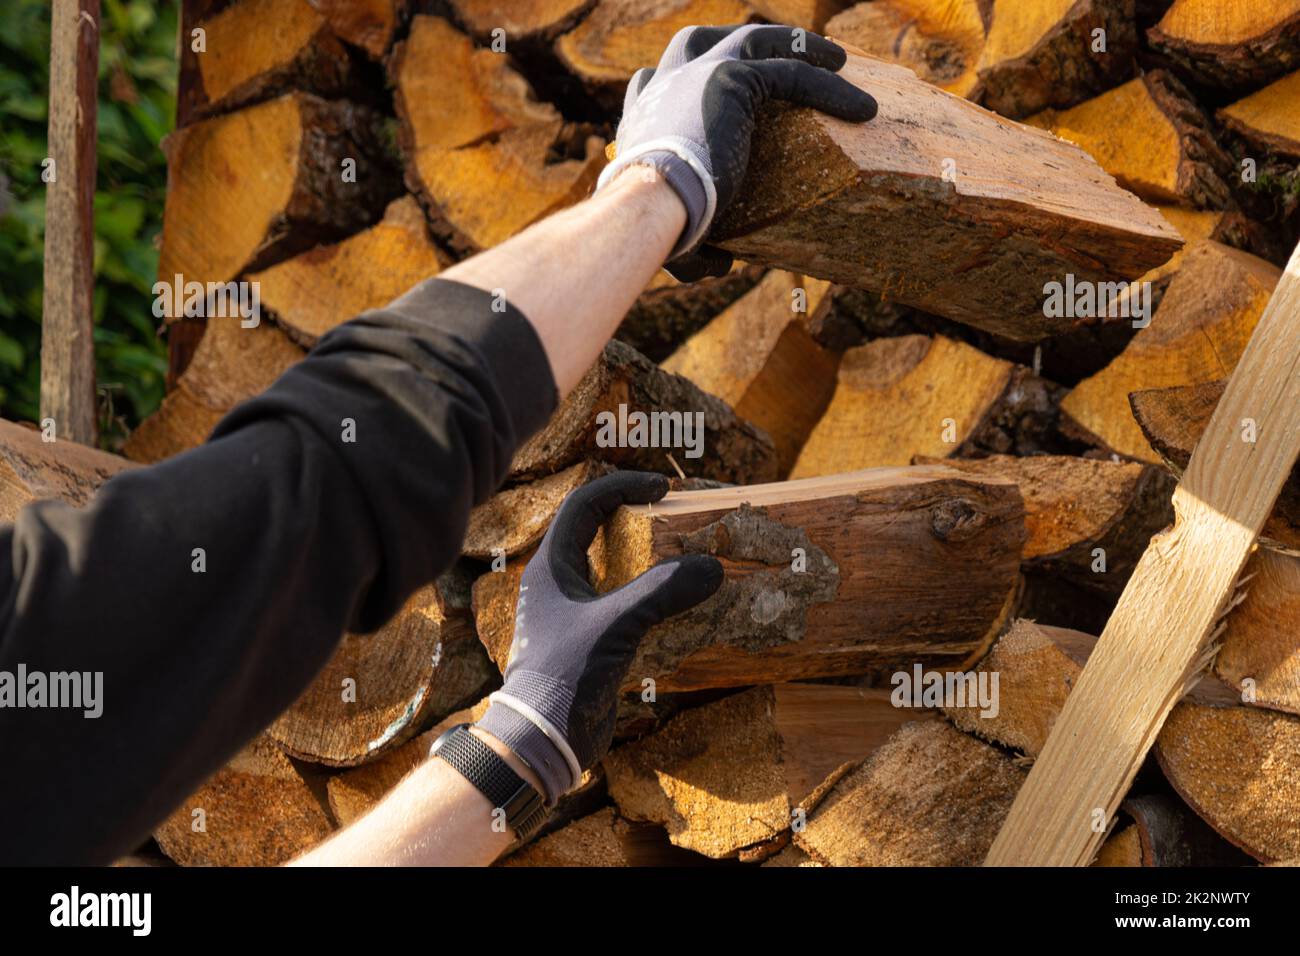 Heating with wood: Pulling out two logs from a winter stockpile of firewood Stock Photo